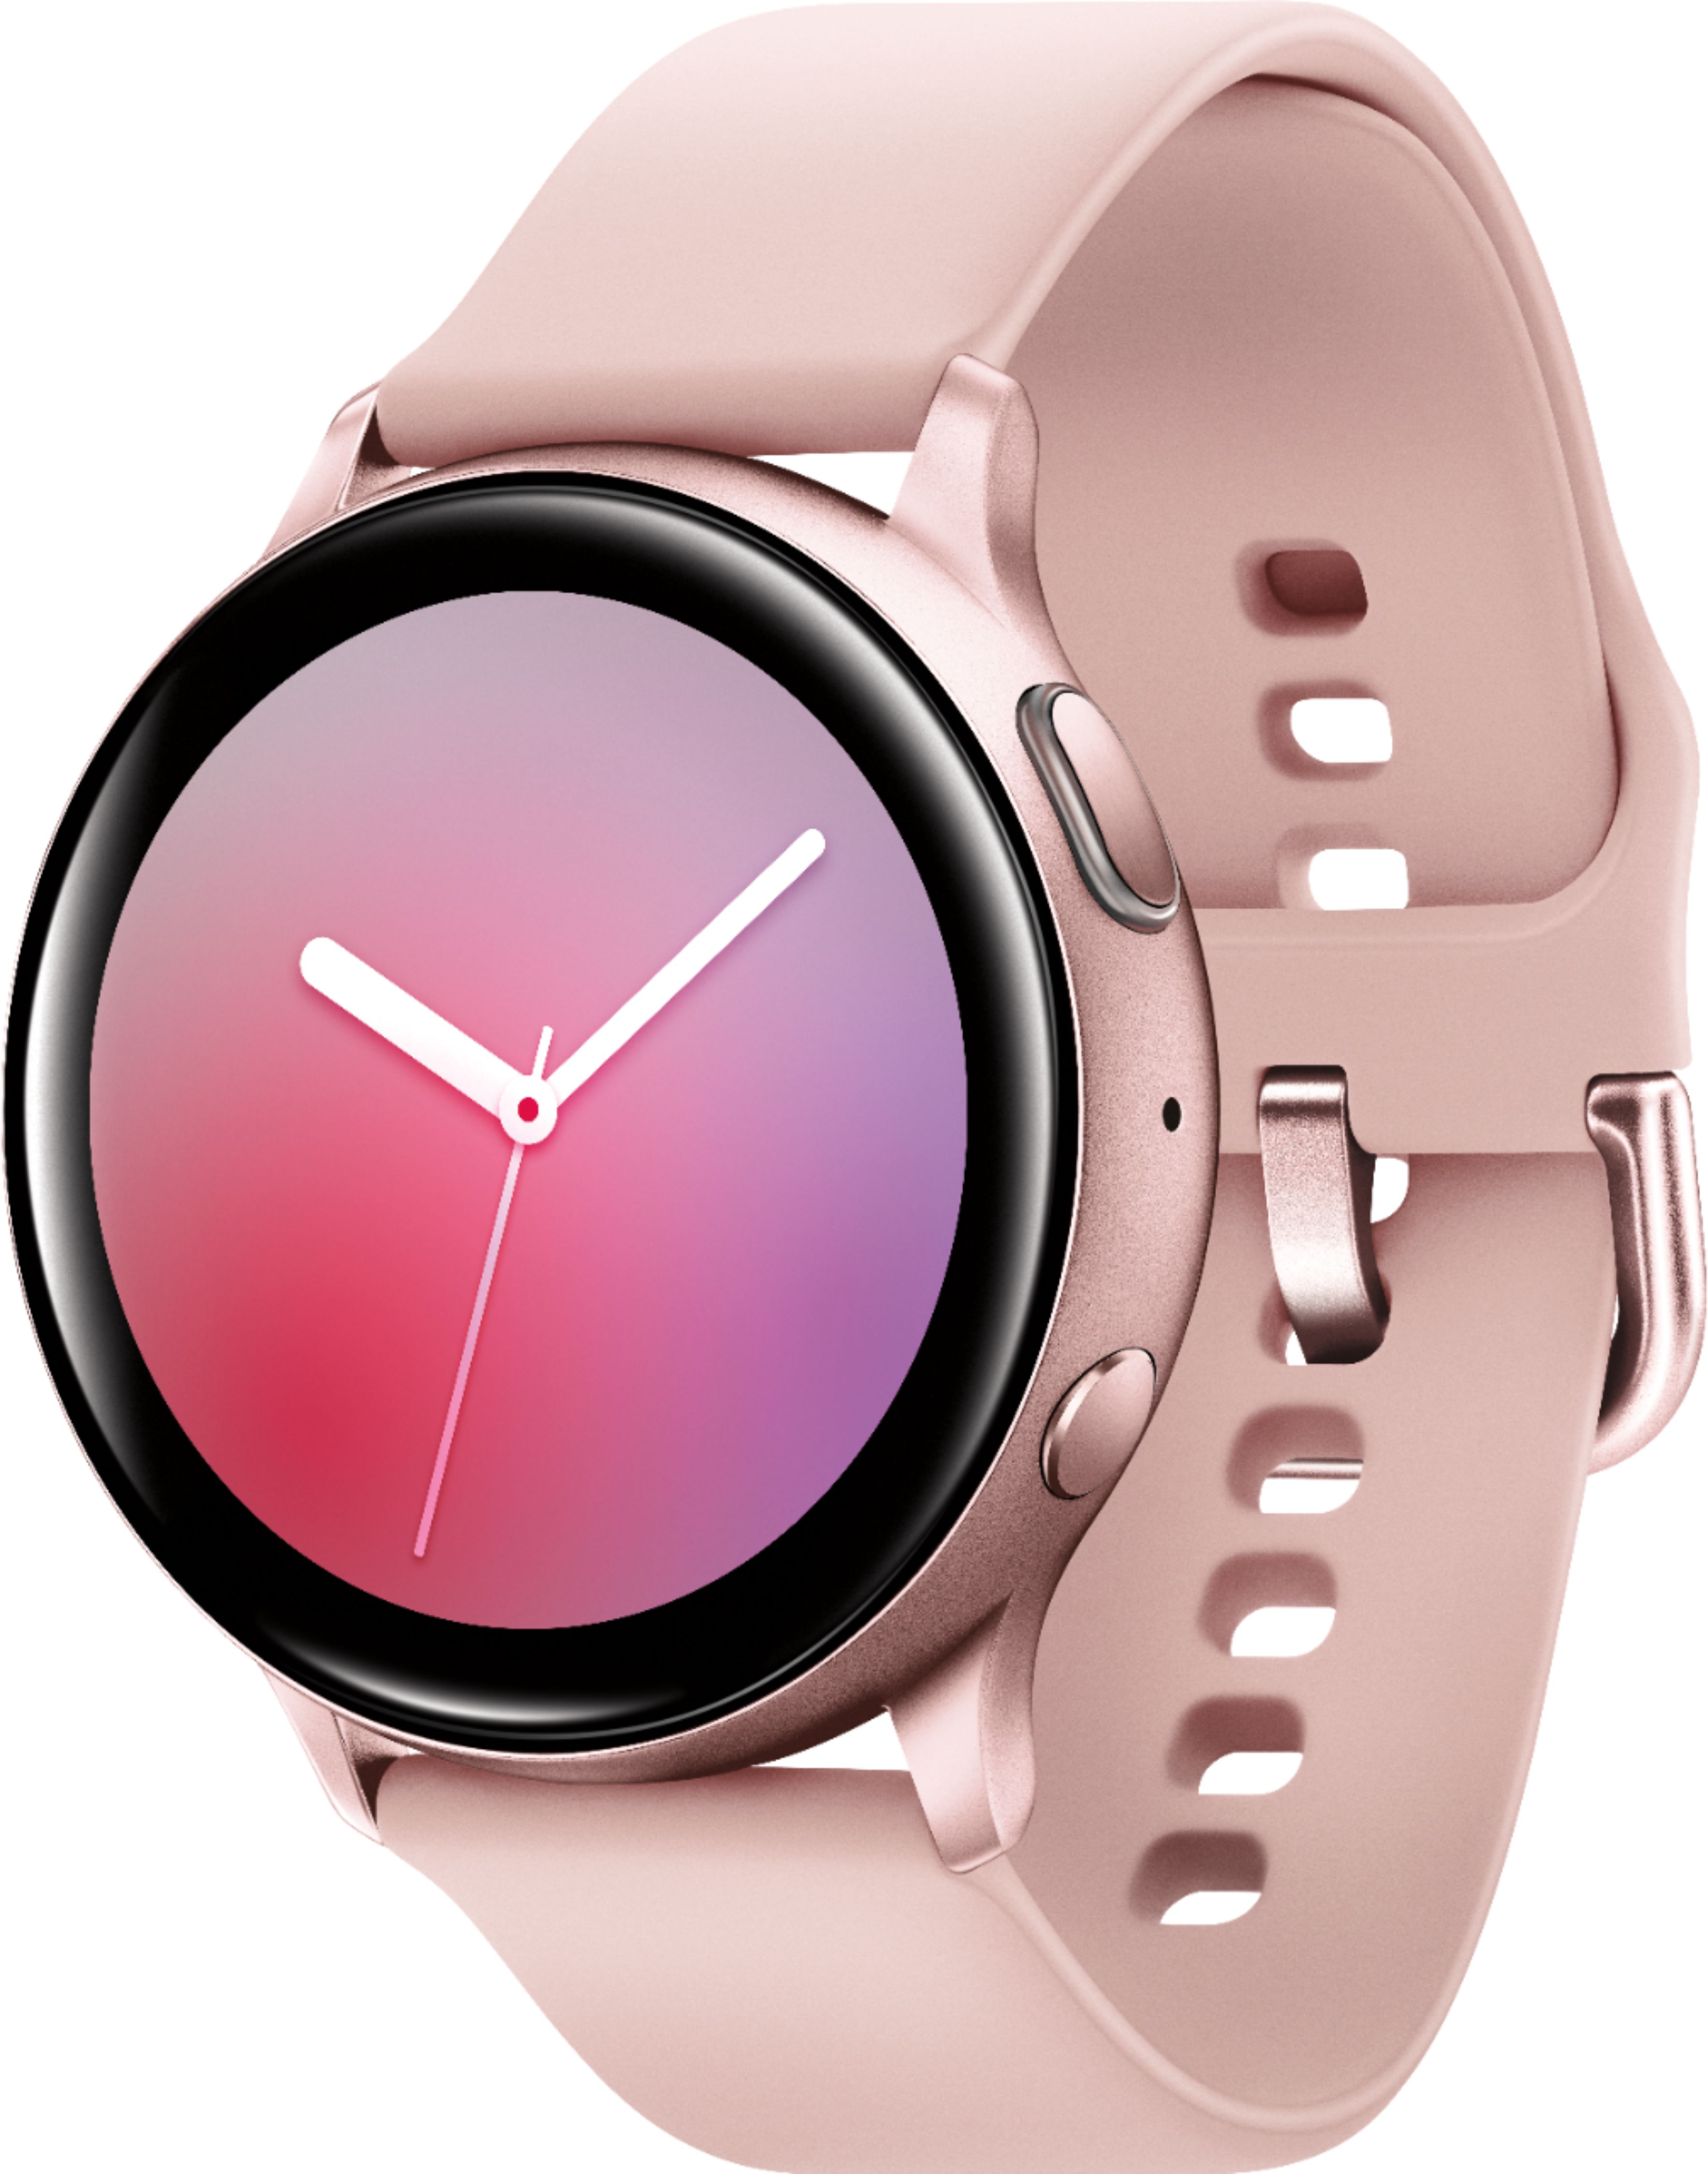 Left View: Samsung - Geek Squad Certified Refurbished Galaxy Watch Active2 Smartwatch 40mm Aluminum - Pink Gold